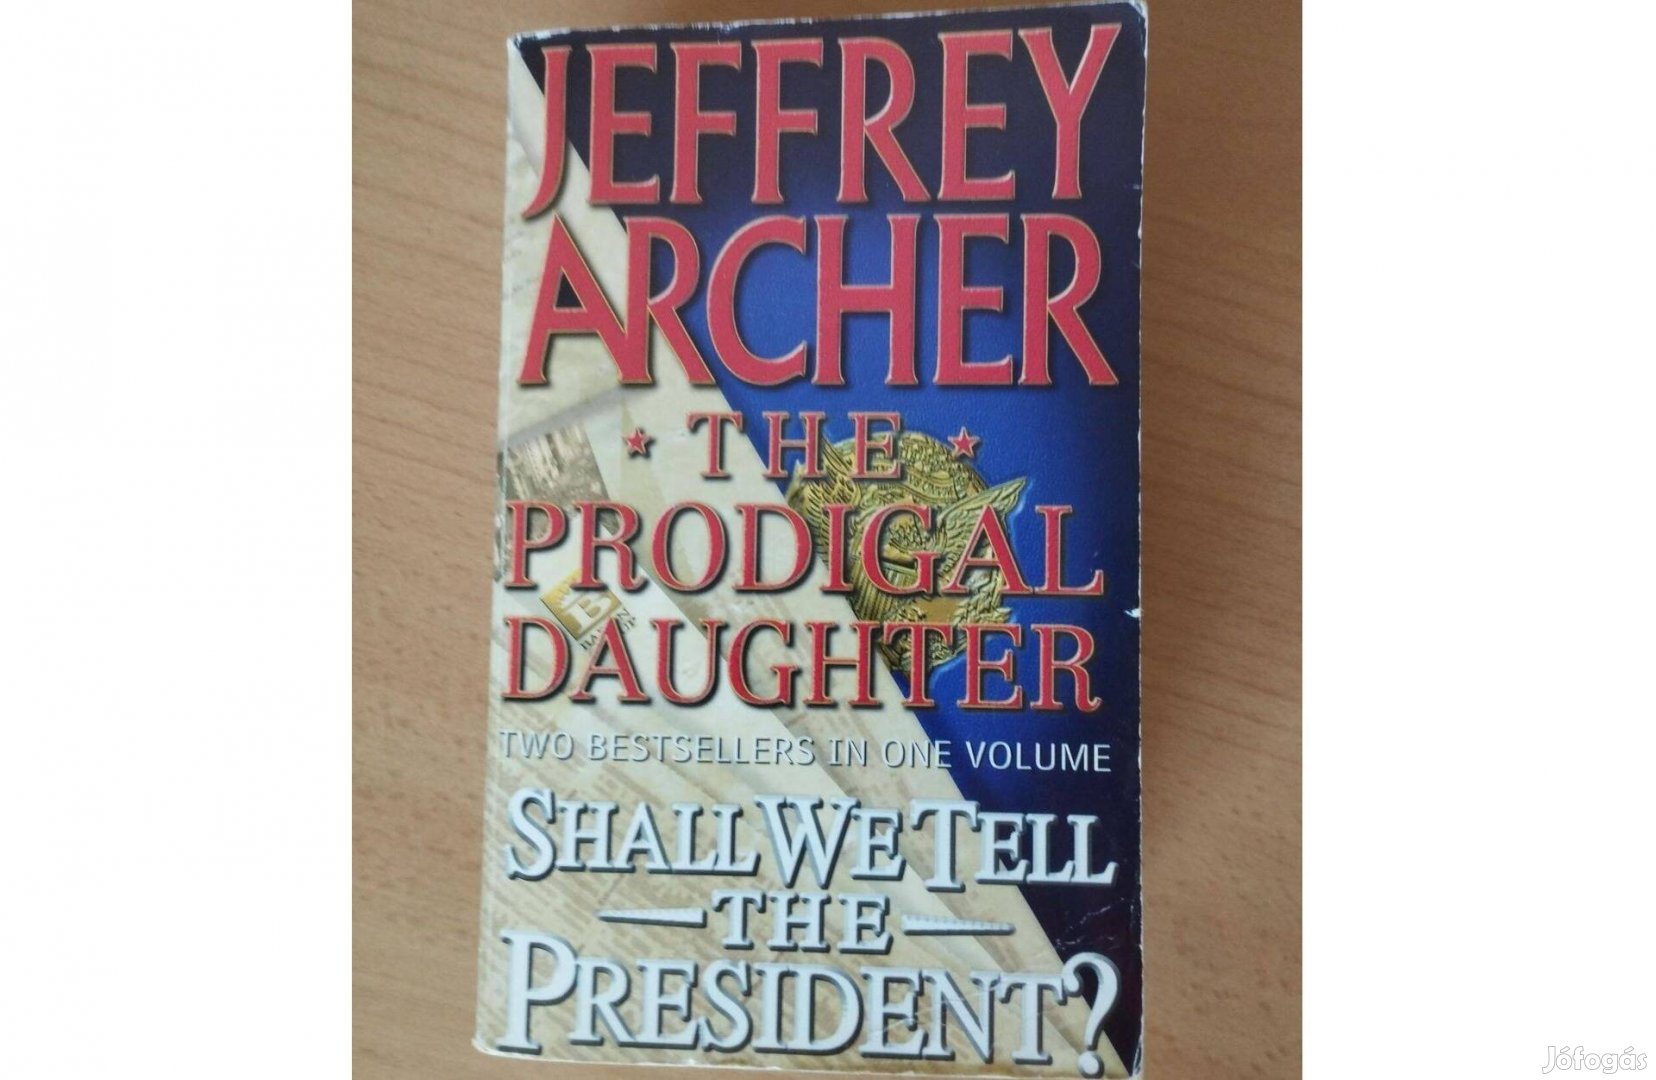 The Prodigal Daughter- Shall We Tell The President / Jeffrey Archer